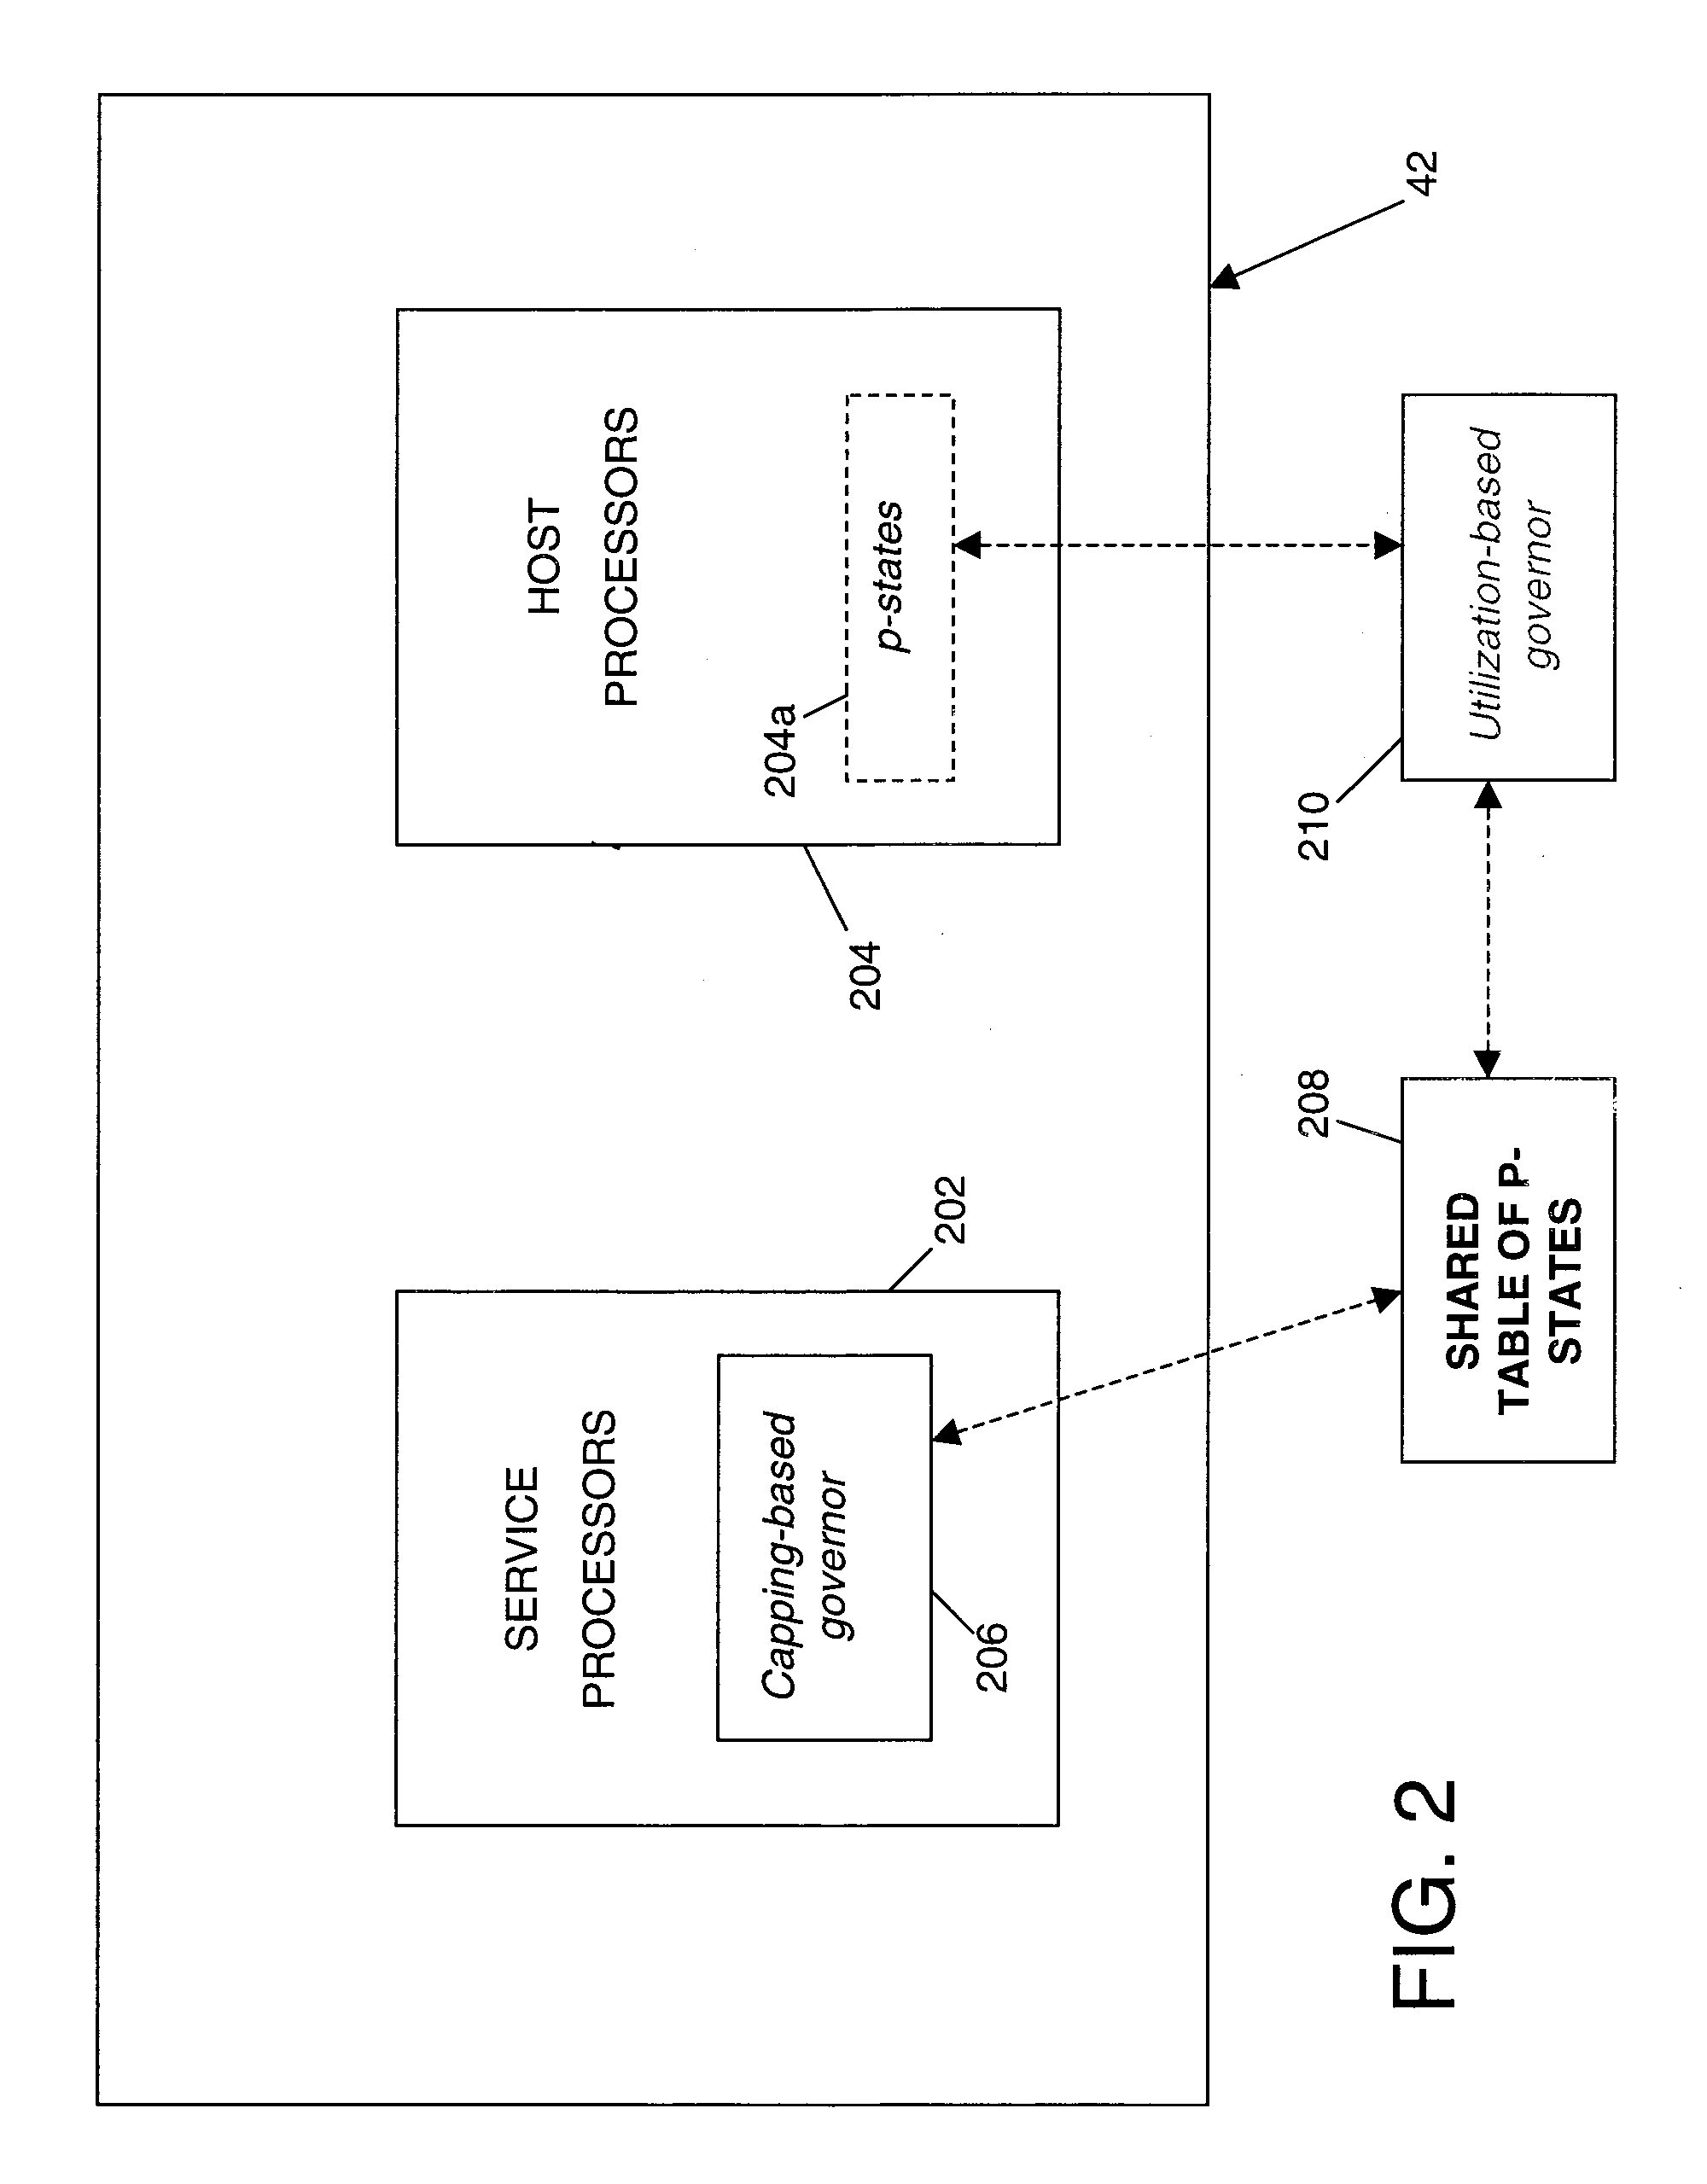 Method for power capping with co-operative dynamic voltage and frequency scaling